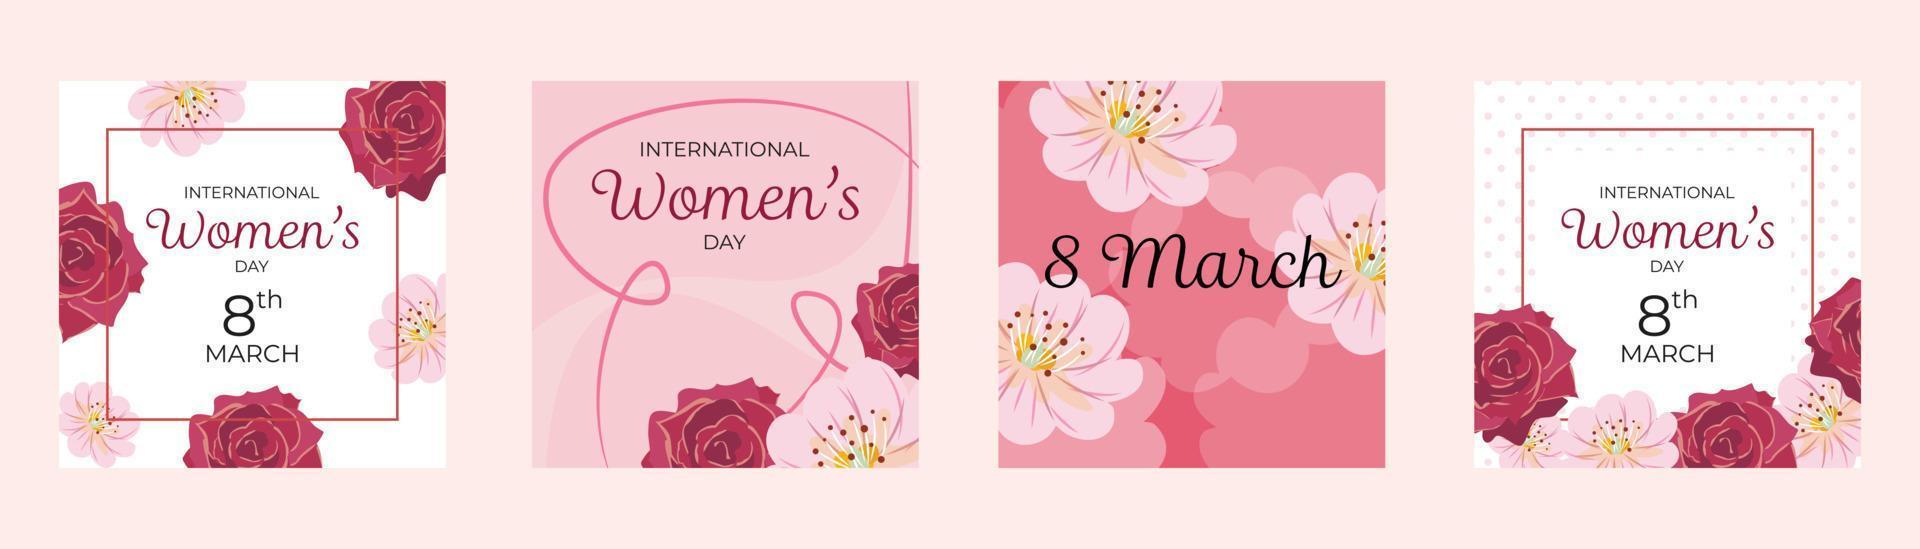 Collection of floral templates for international women's day vector